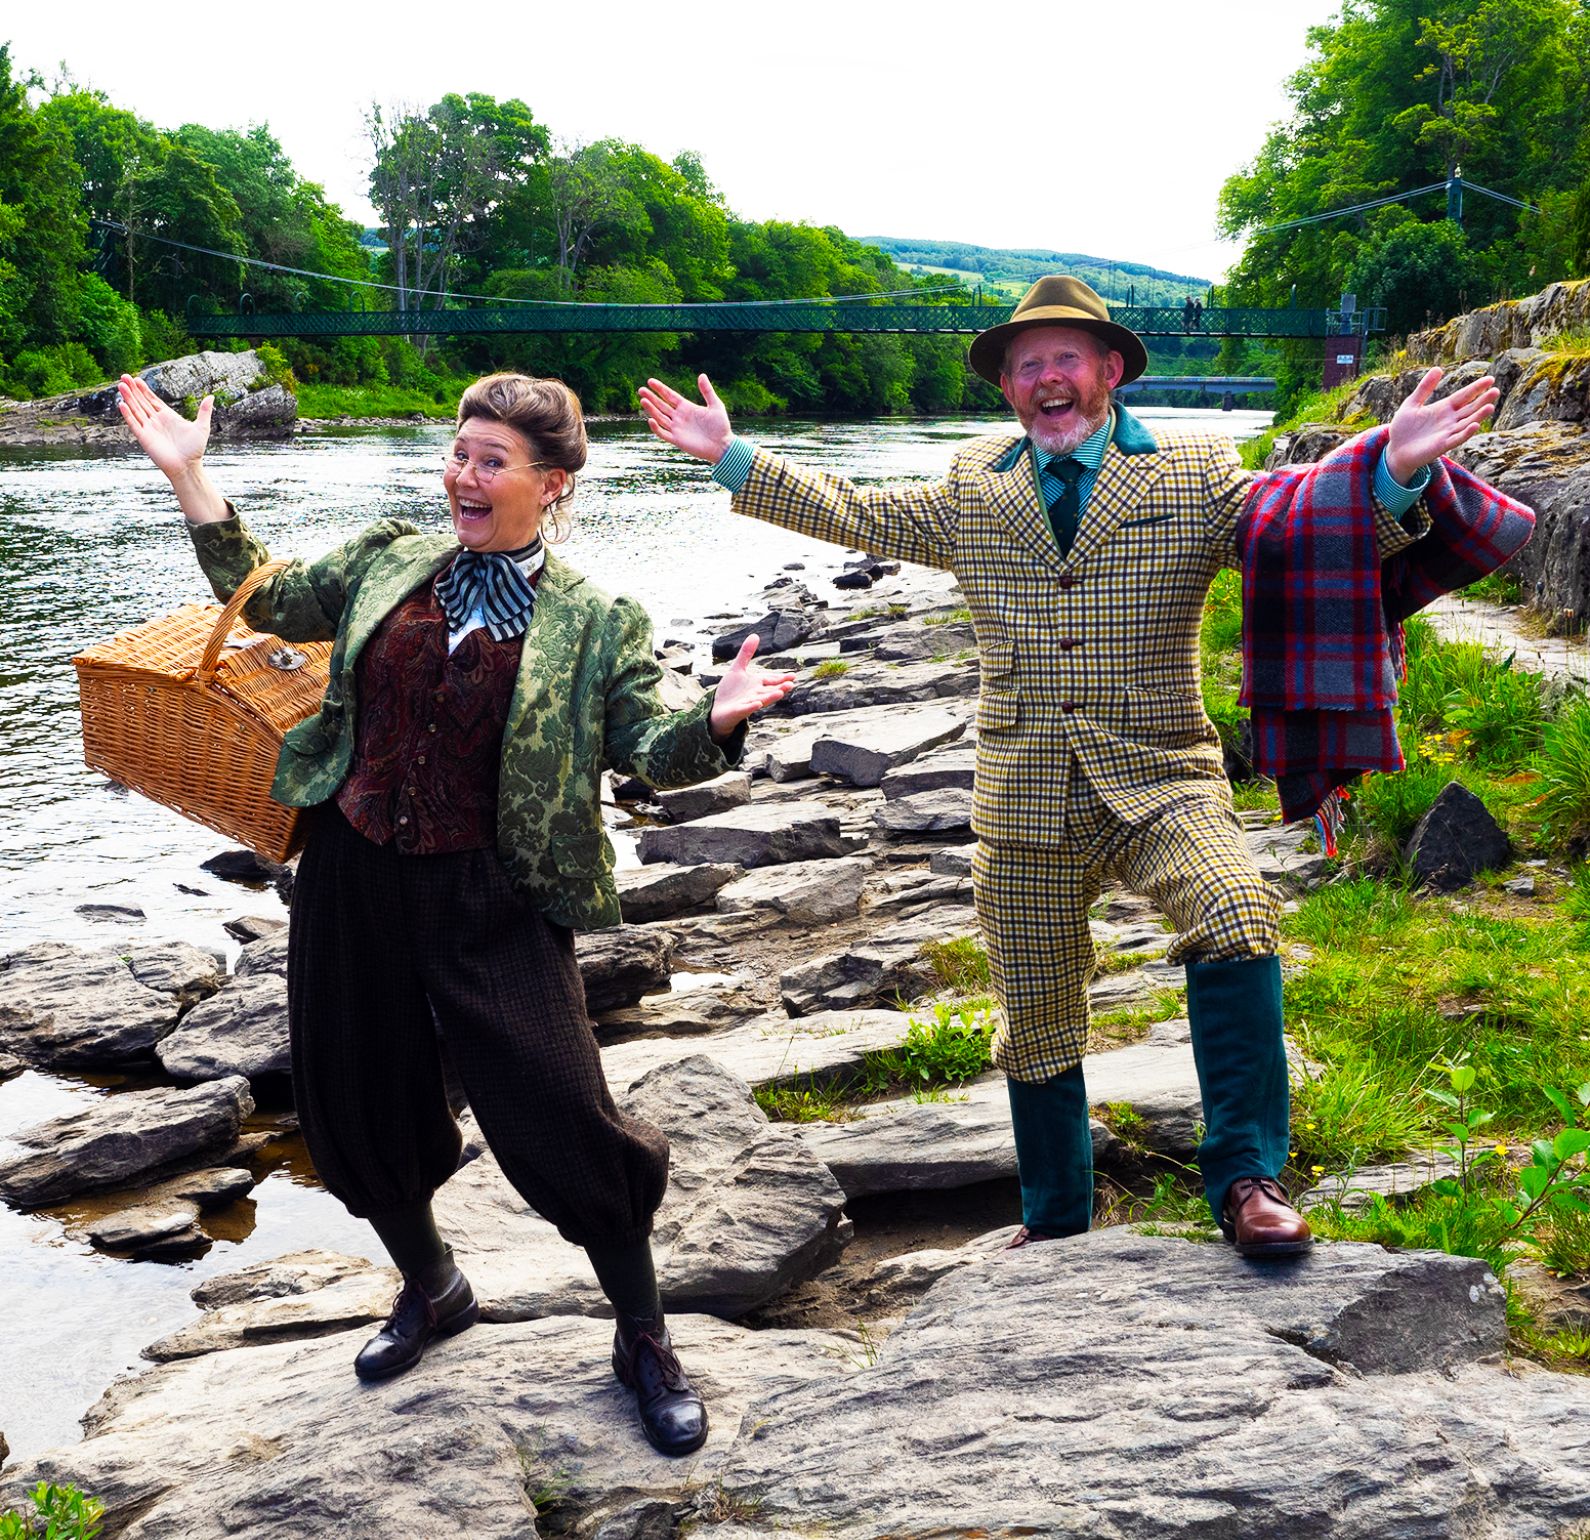 Two actors standing on the bank of the River Tummel, one dressed in a Tweed jacket and trousers with a red tartan blanket over their arm and the other in a floral jacket and a hamper over their arm, behind them is a green bridge going over the River